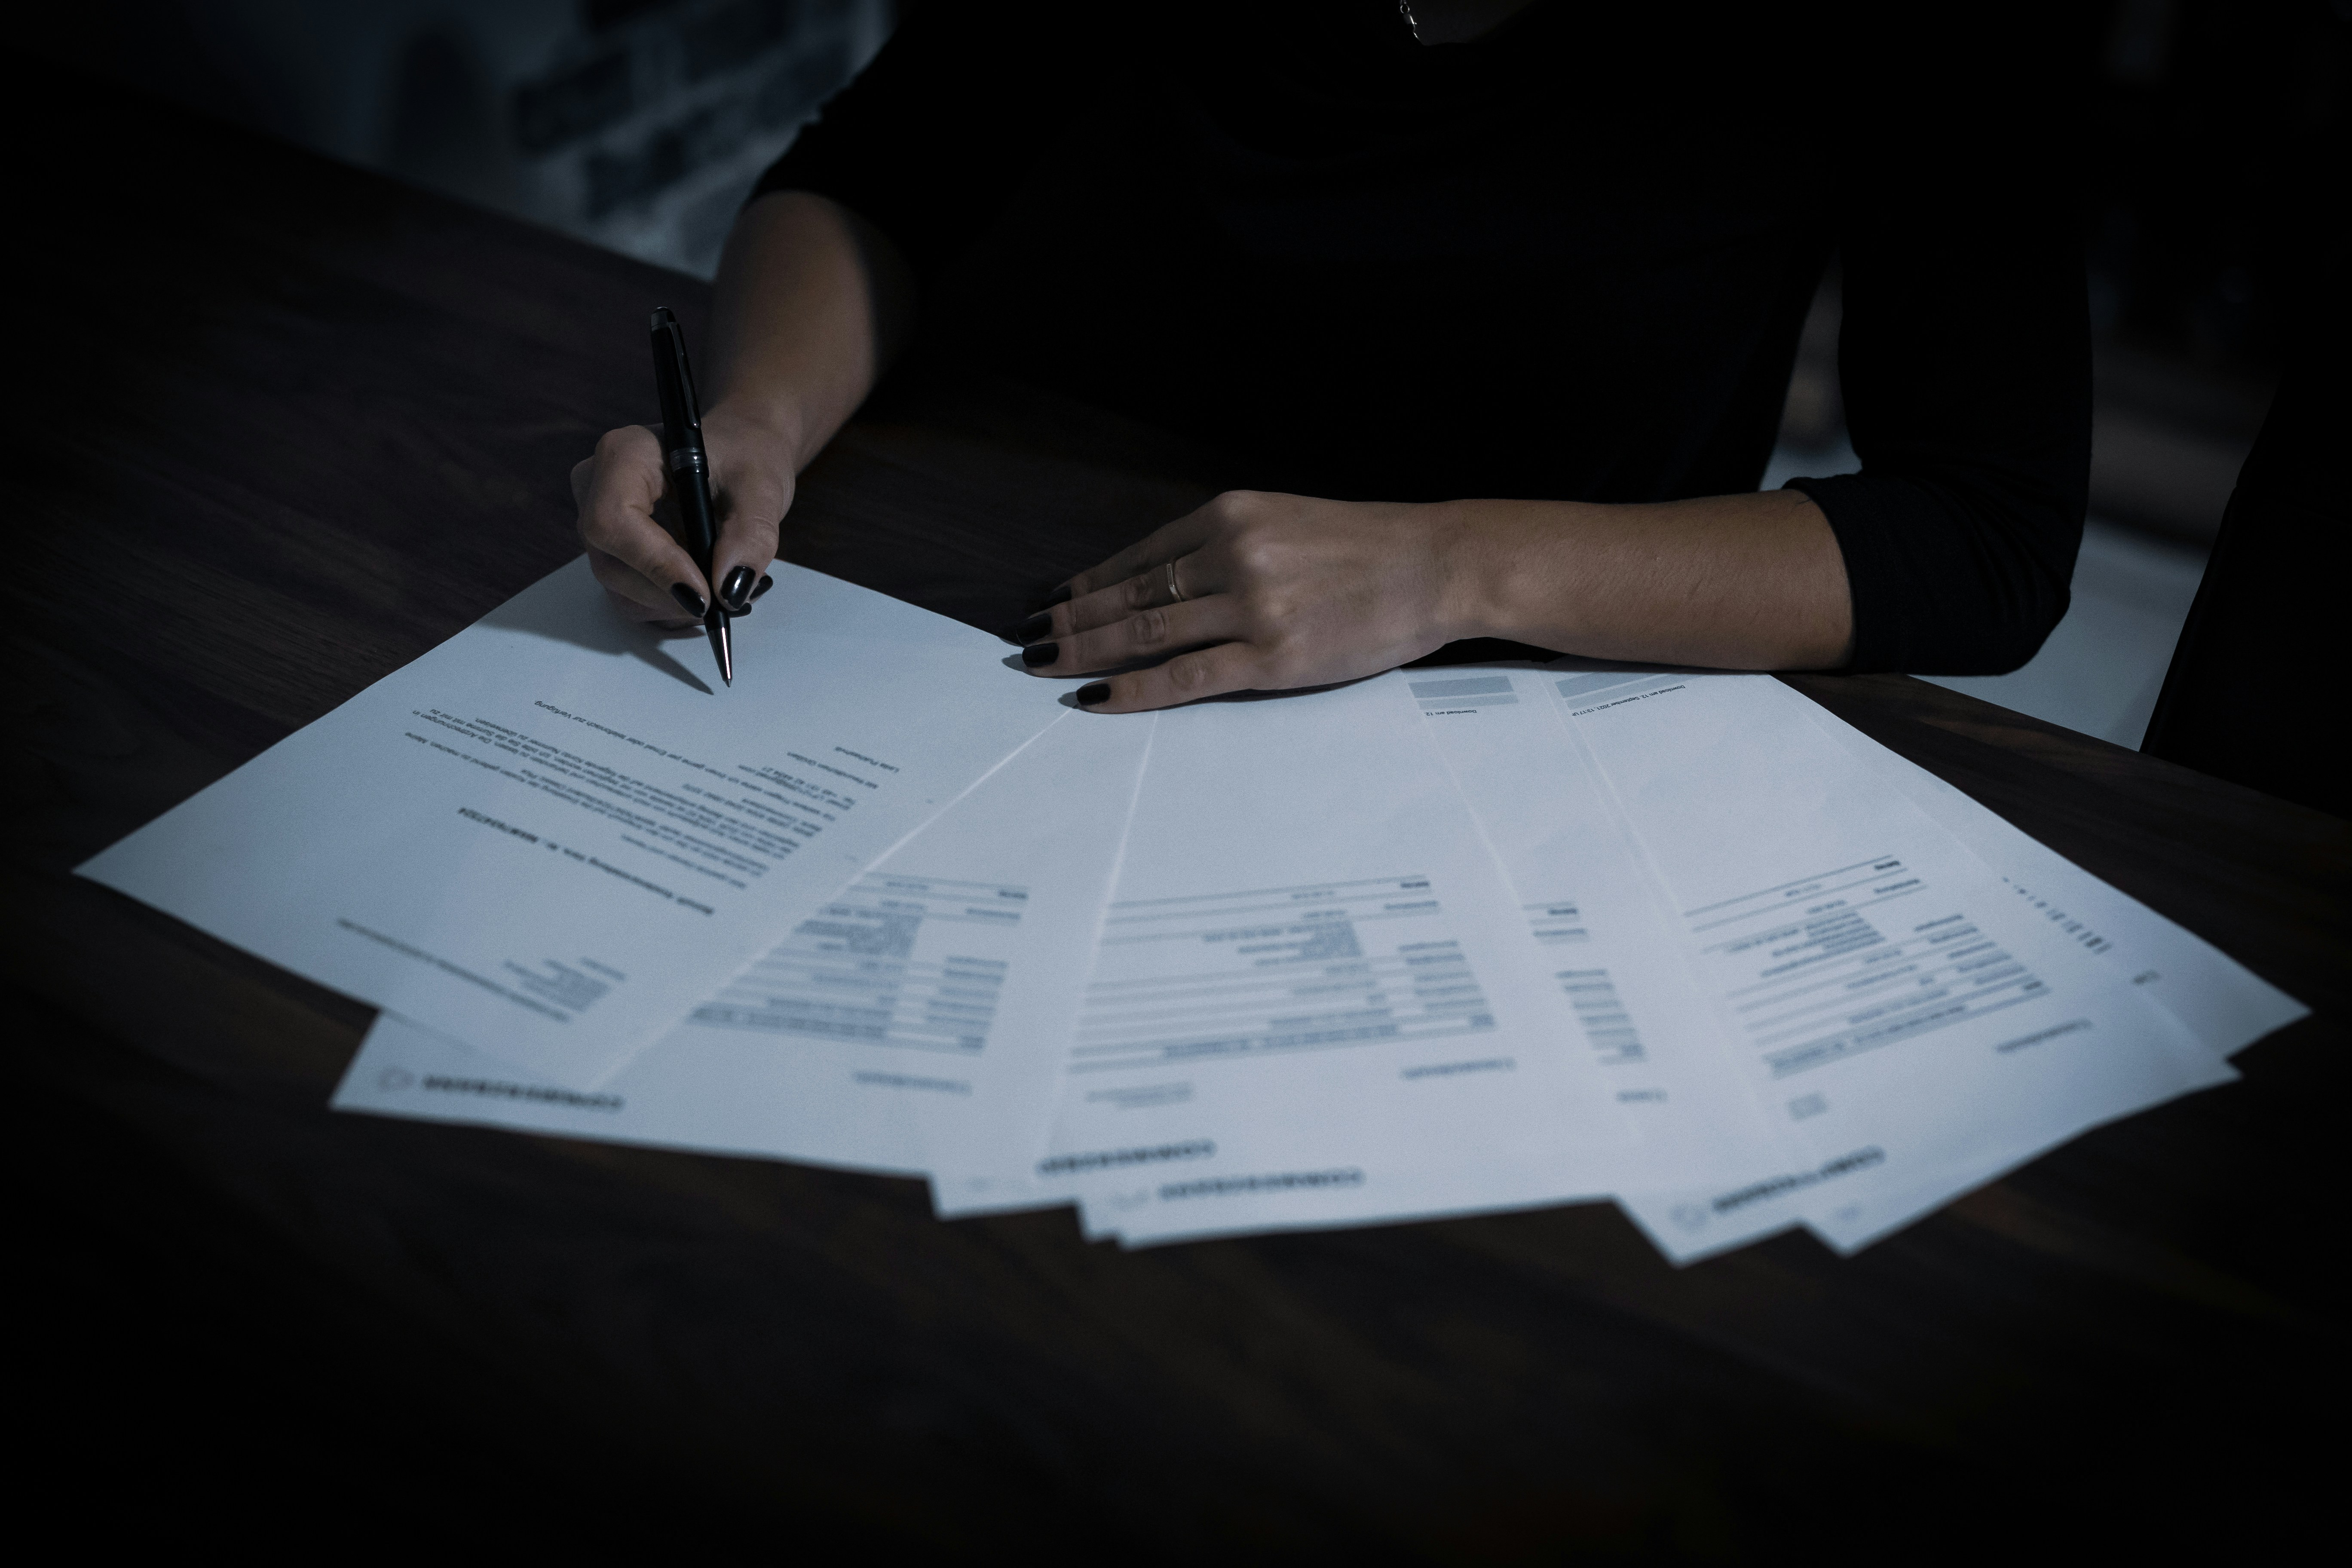 A woman going through reports | Source: Unsplash